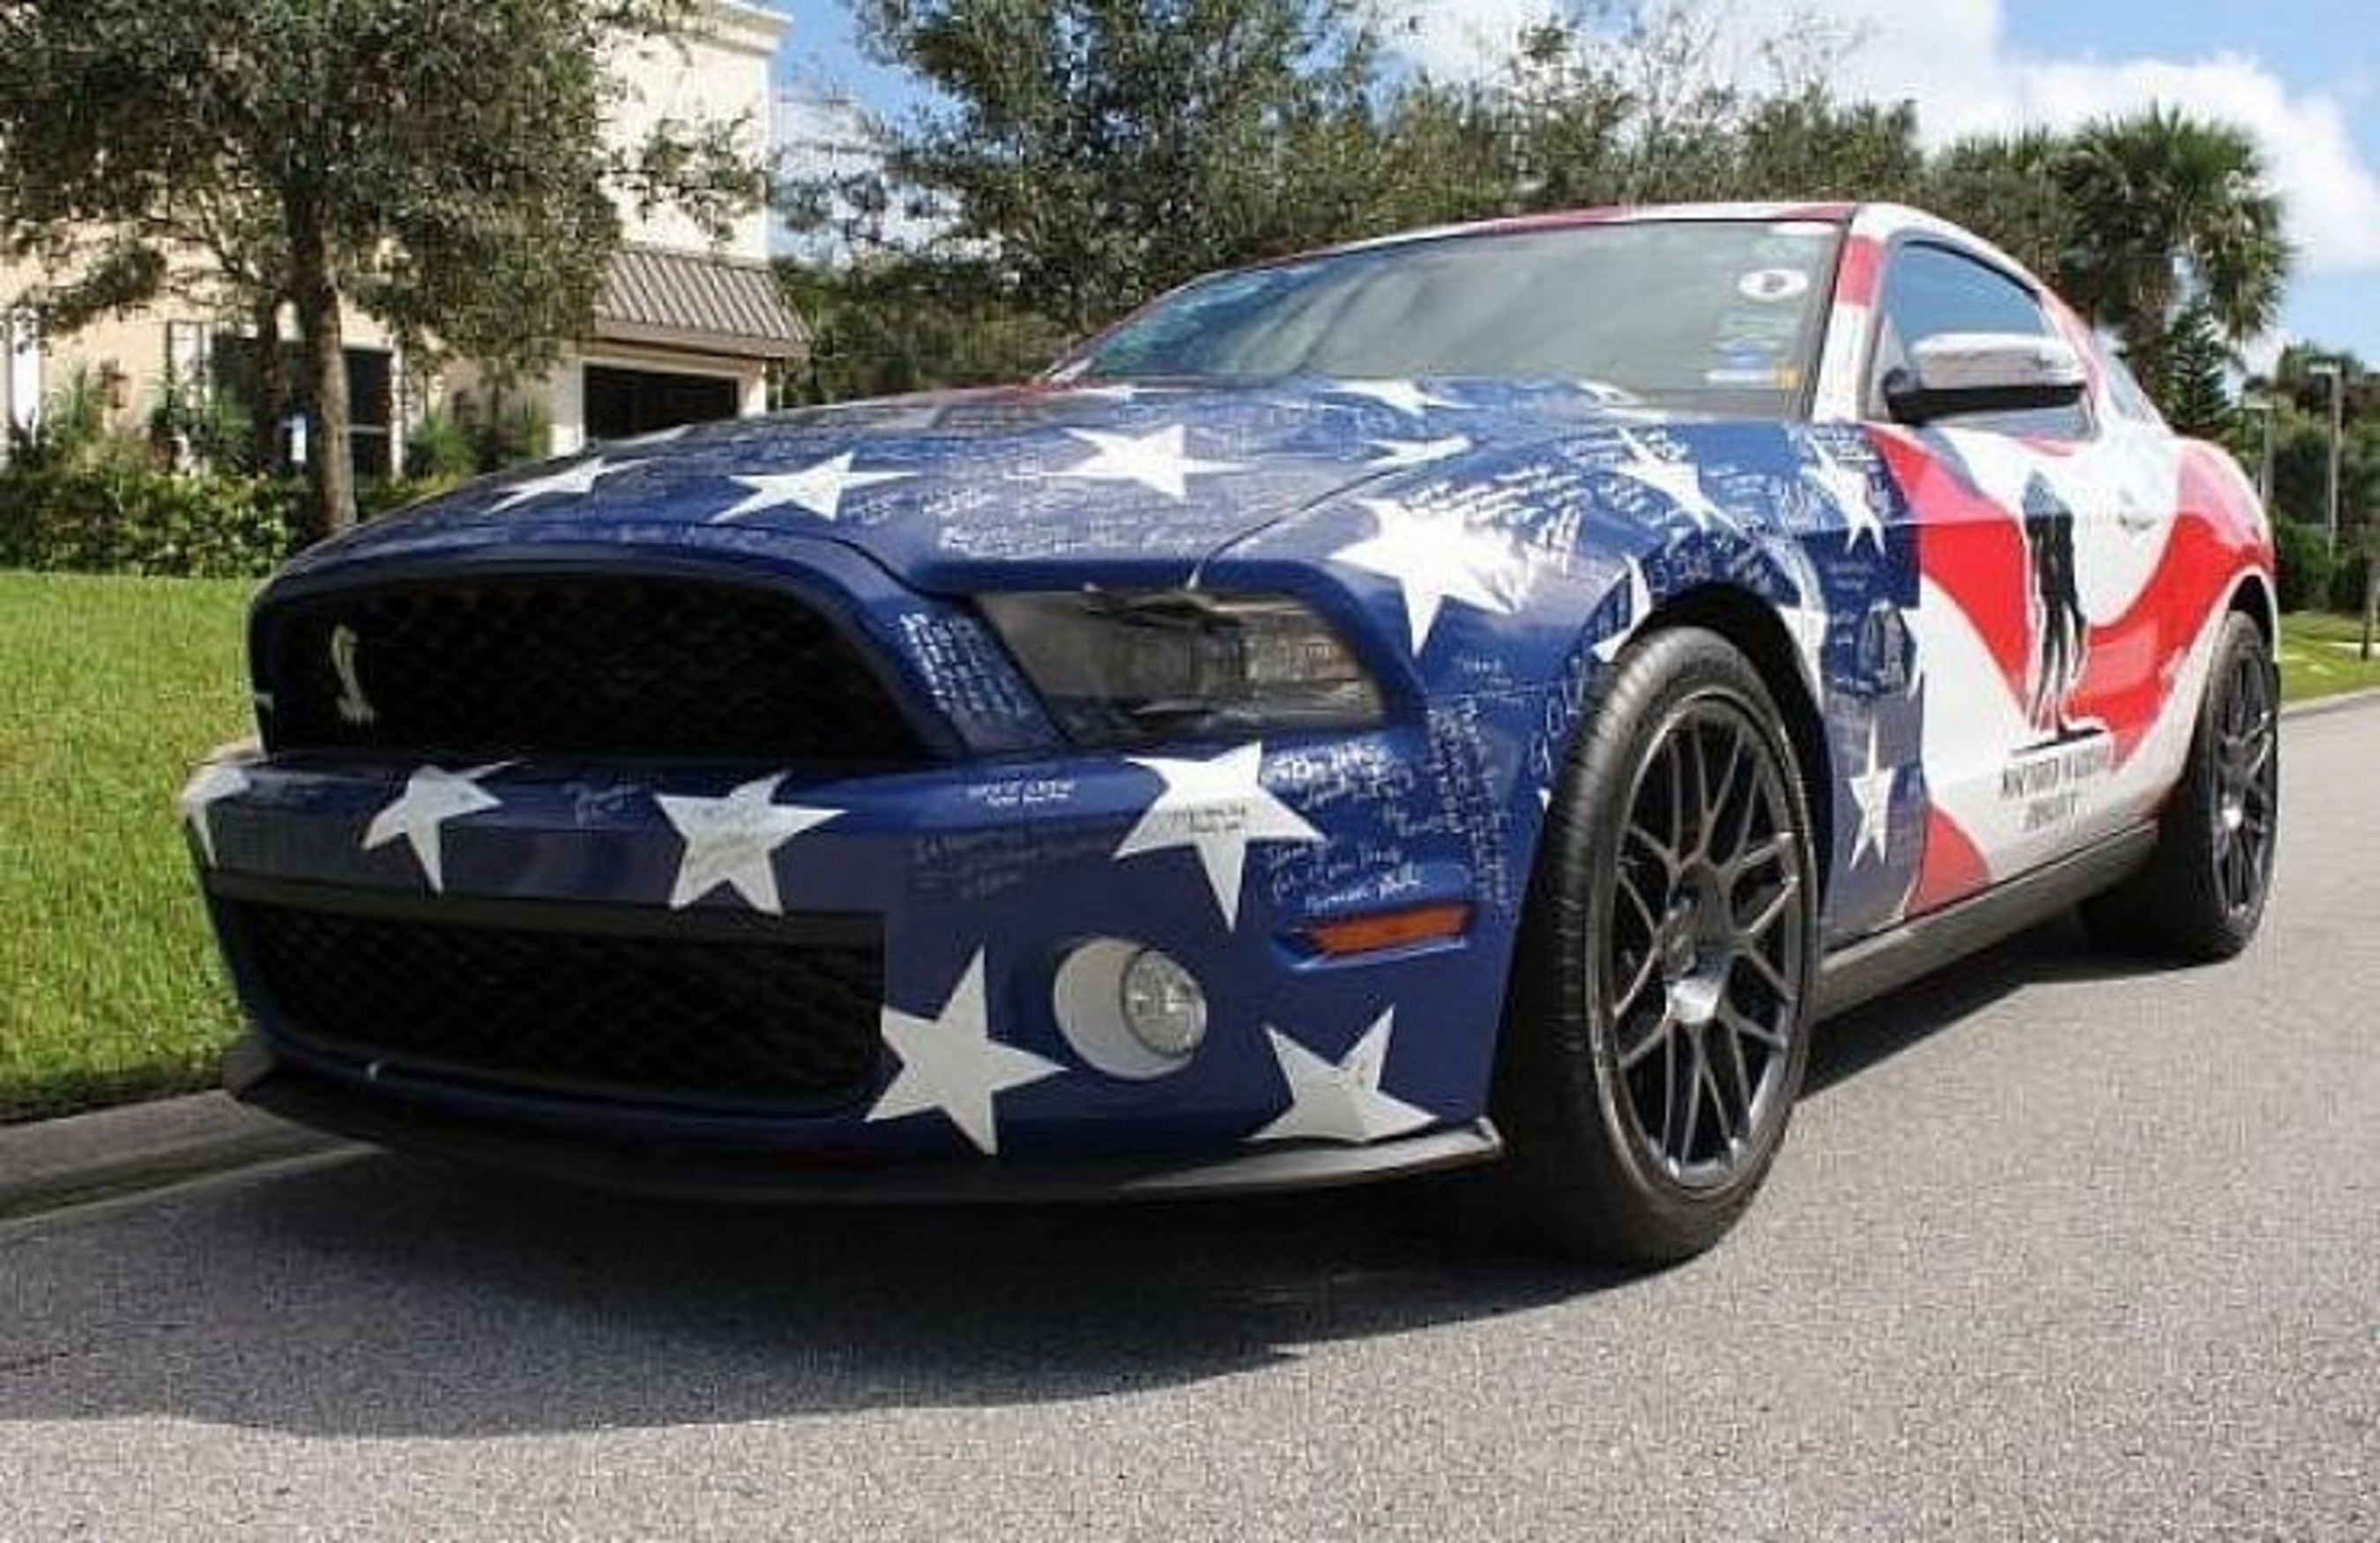 The 2011 Shelby Mustang GT-500, being sold by Jack Miller to support Wounded Warrior Project.